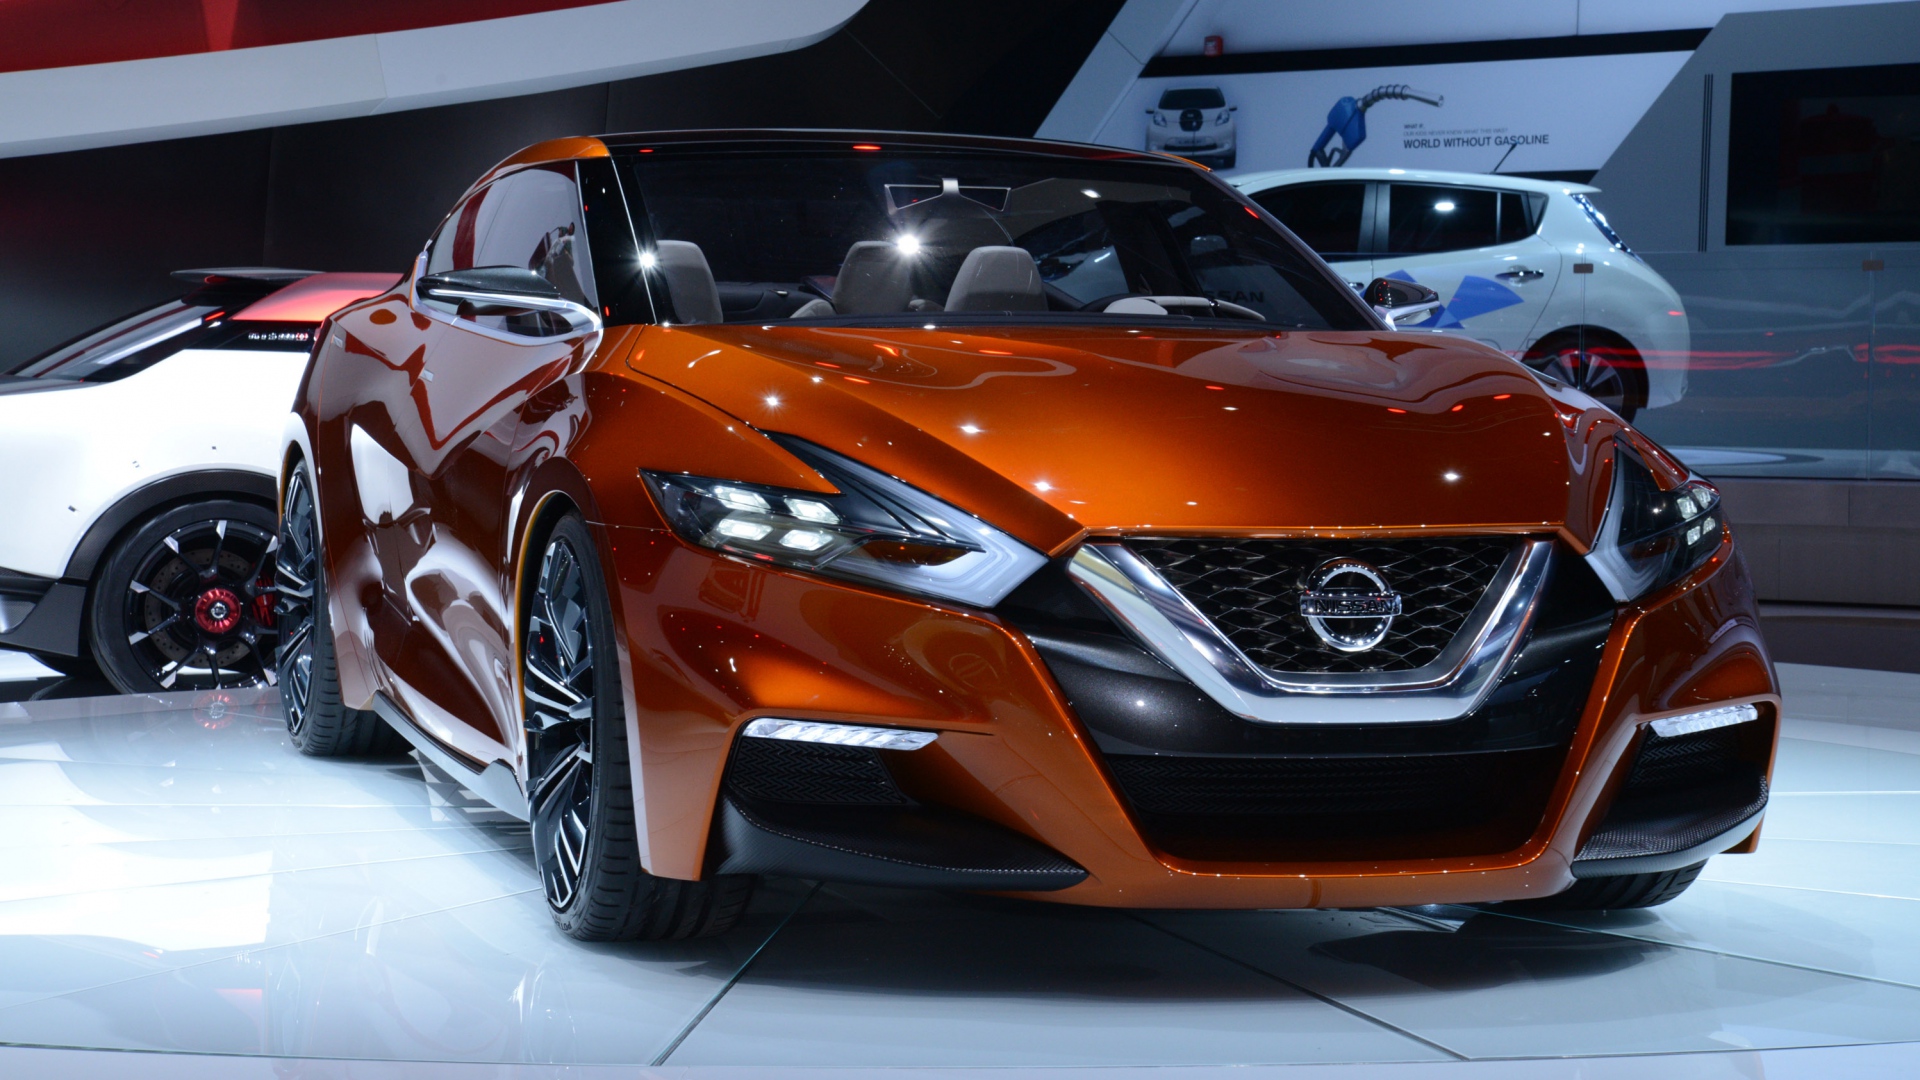 Nissan New Model Car-1920x1080 - 9to5 Car Wallpapers